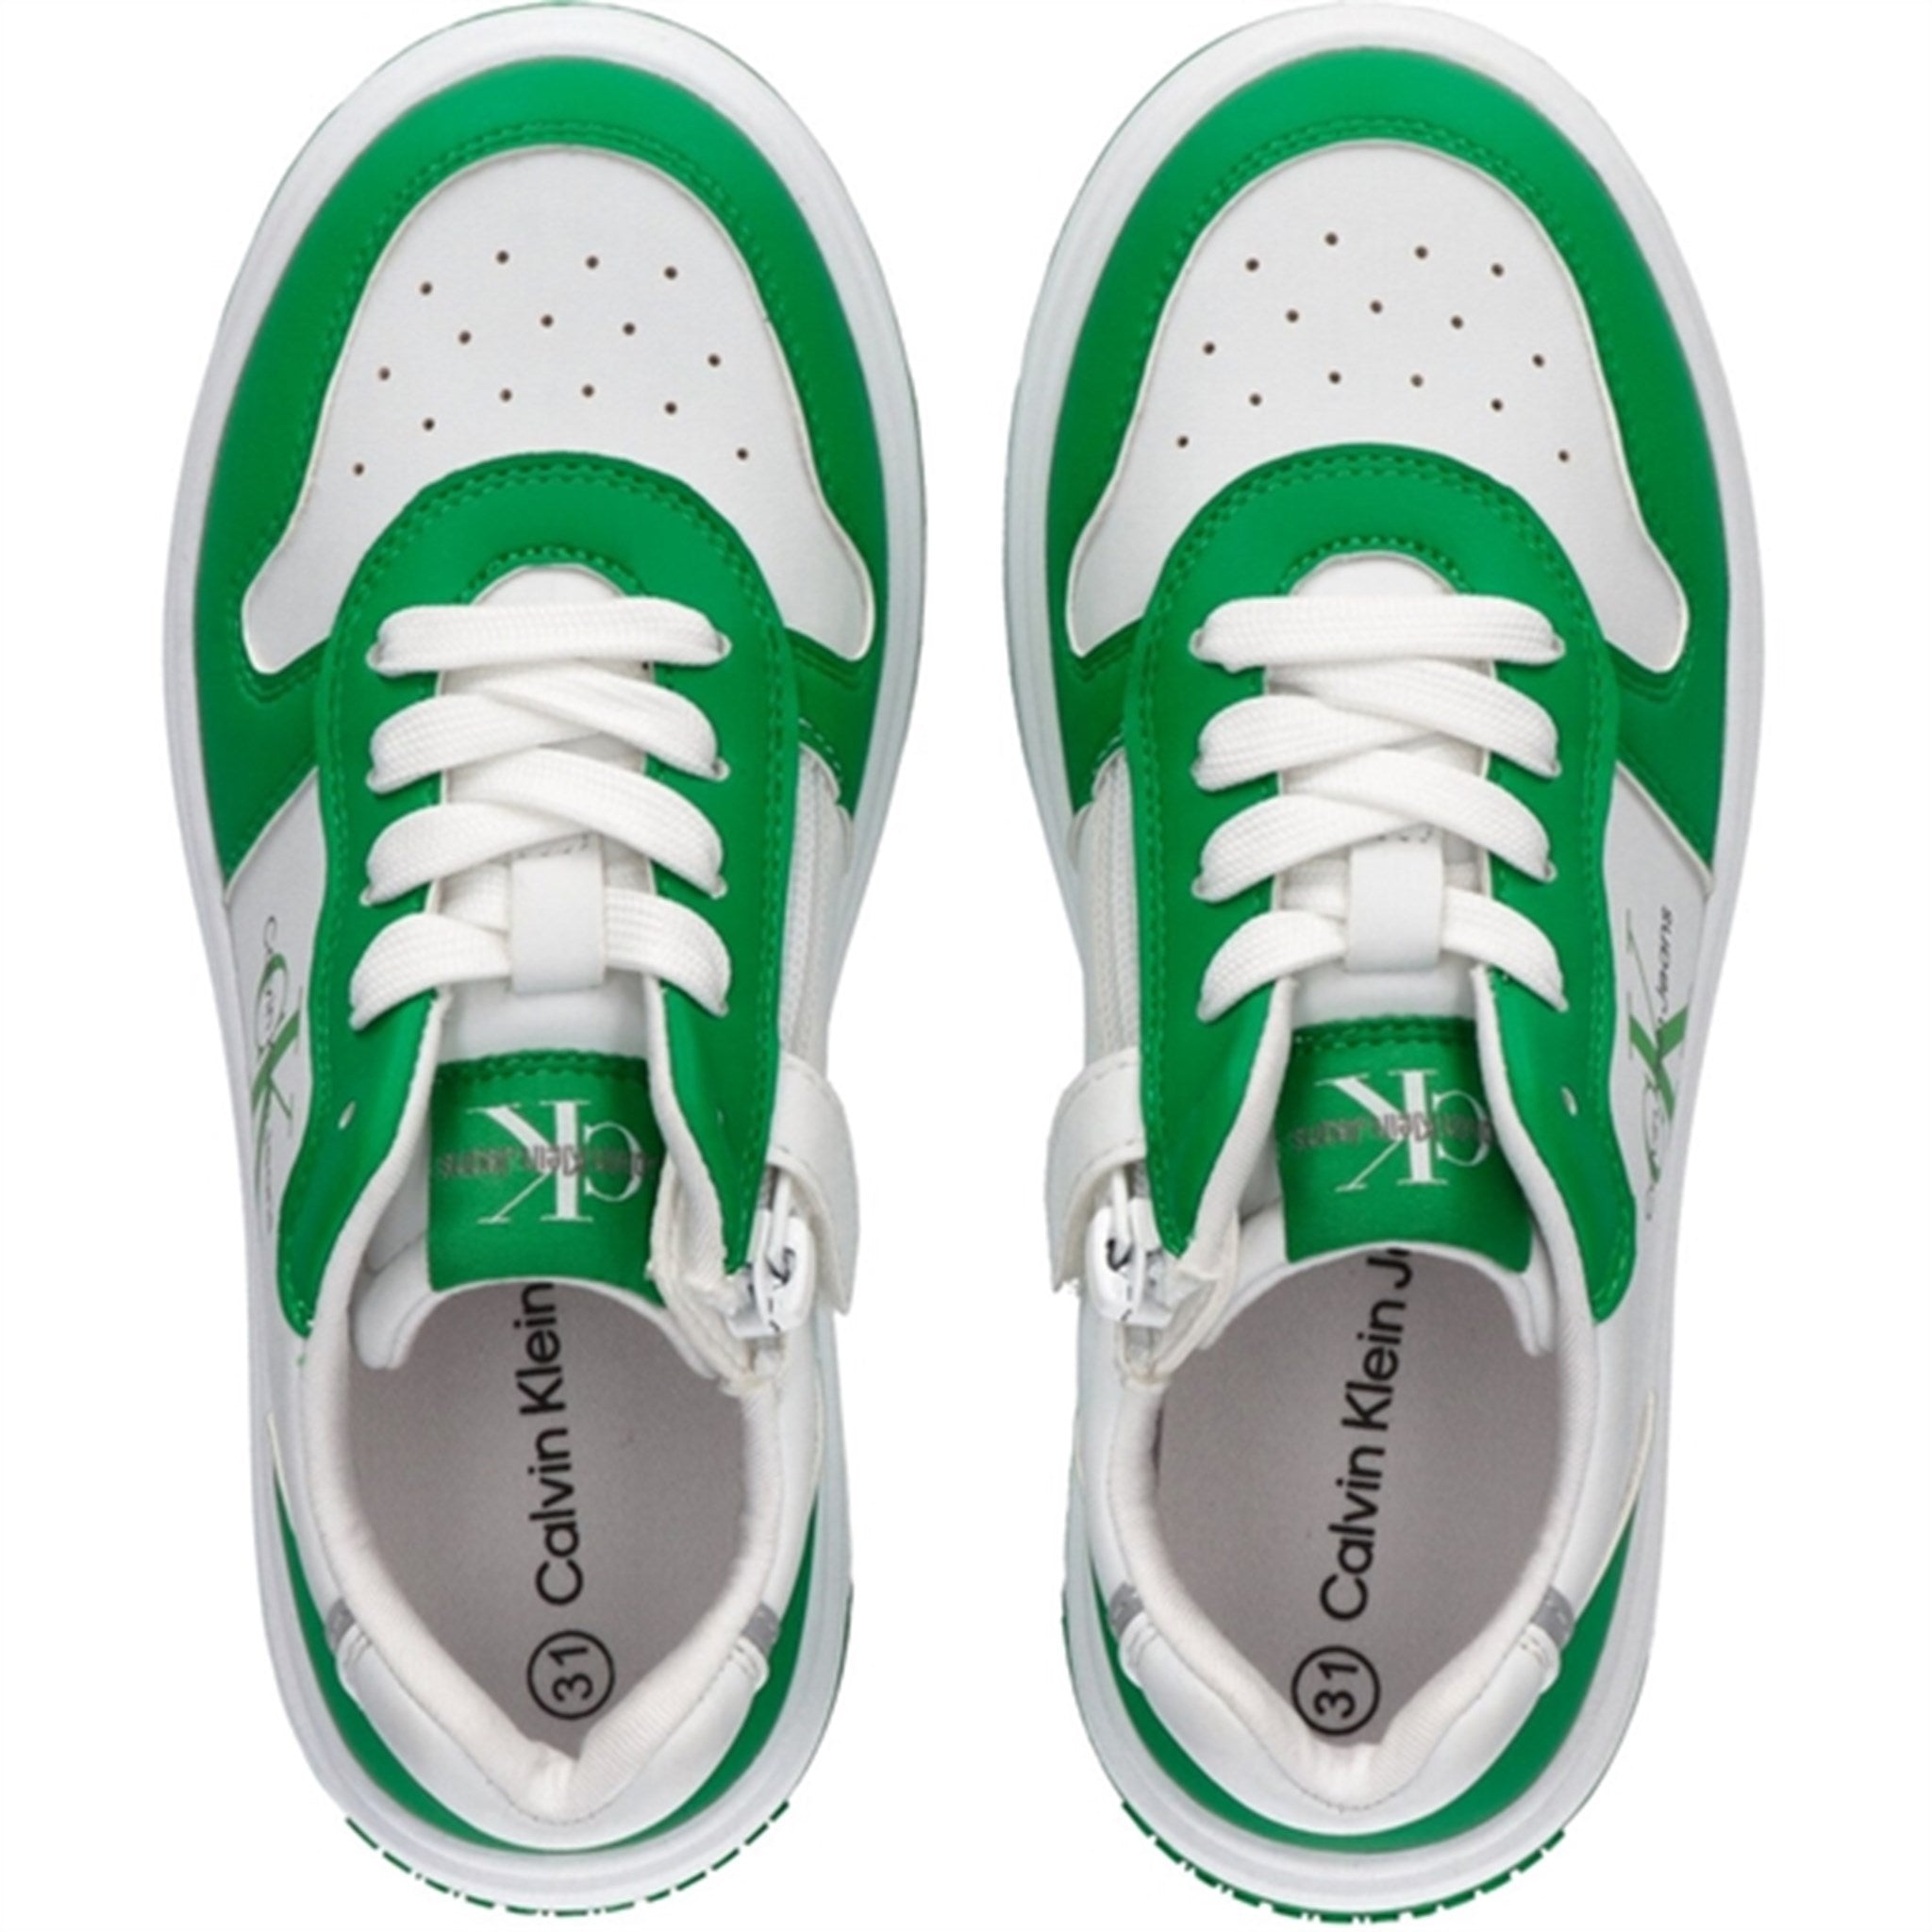 Calvin Klein Low Cut Lace-Up Sneakers Green/White